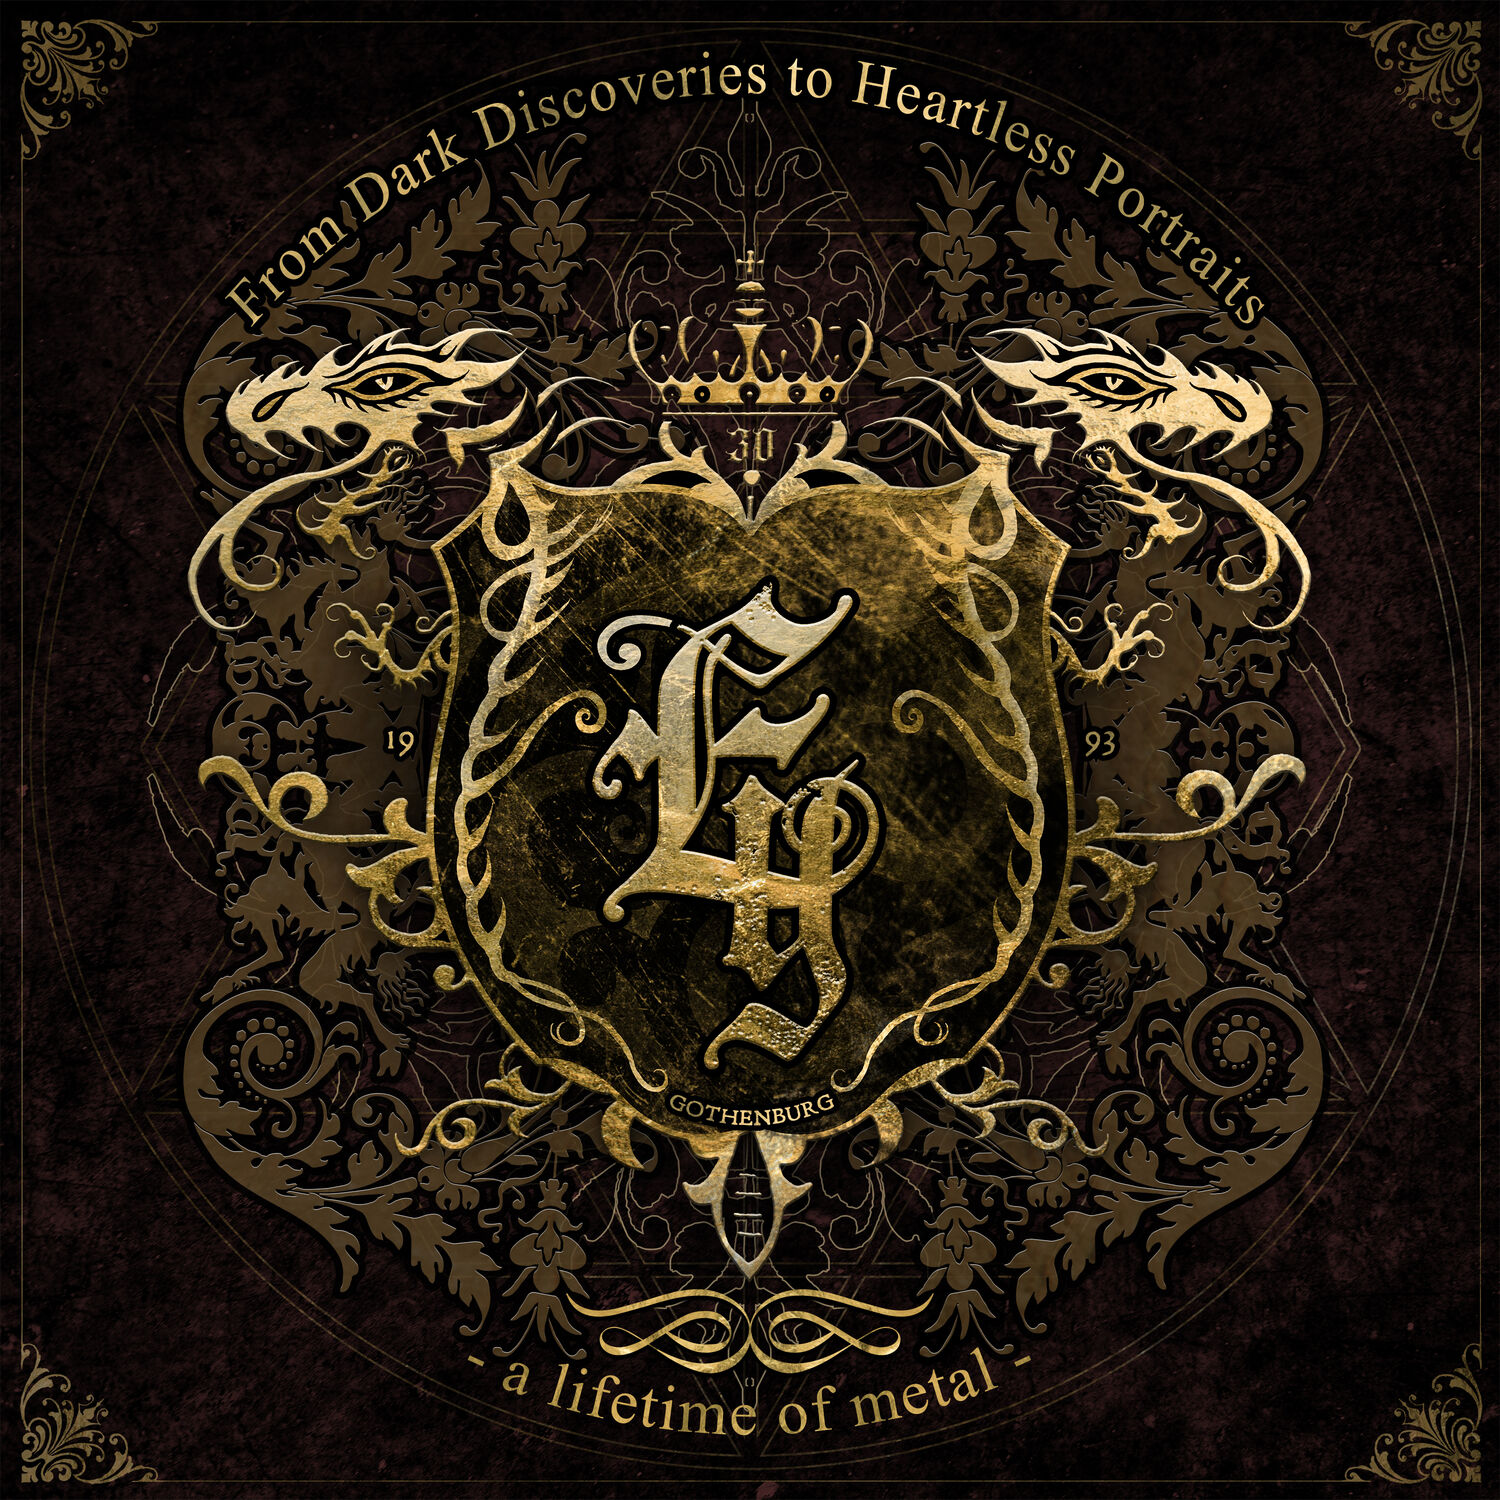 Evergrey – From Dark Discoveries to Heartless Portraits (2023) [24Bit-44.1kHz] FLAC [PMEDIA] ⭐️